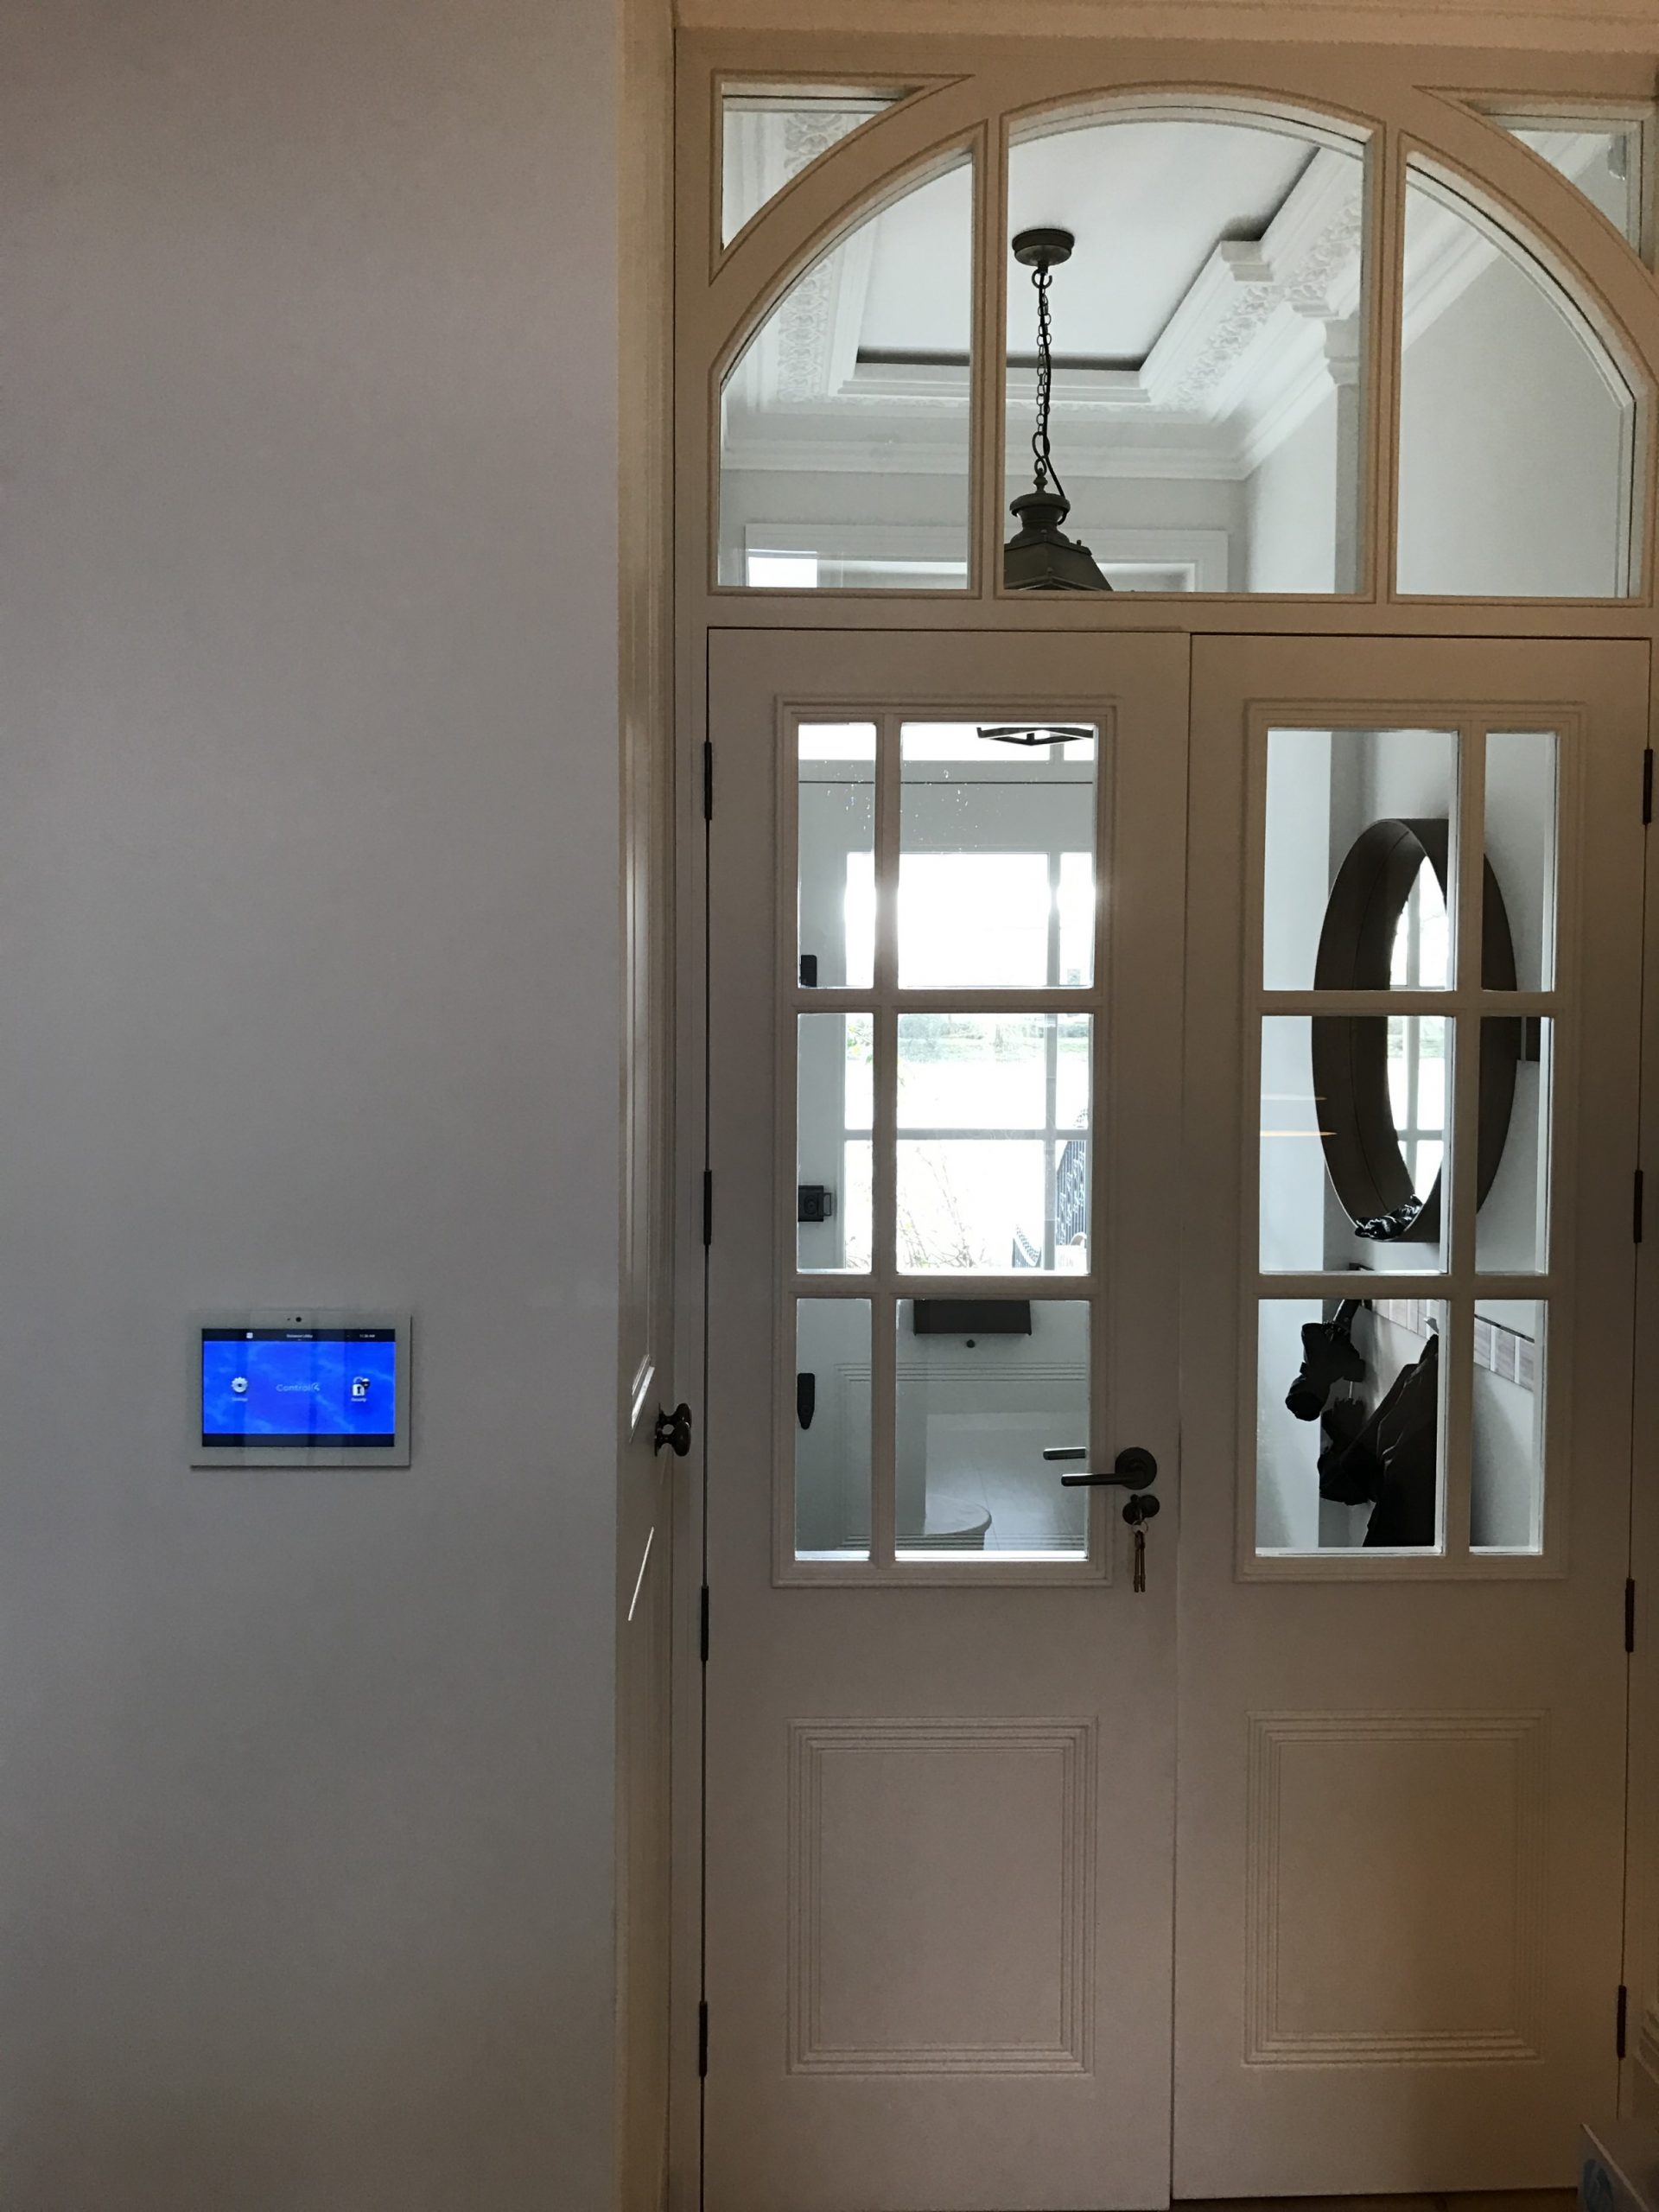 Touch screen security system from Drexler Hooke